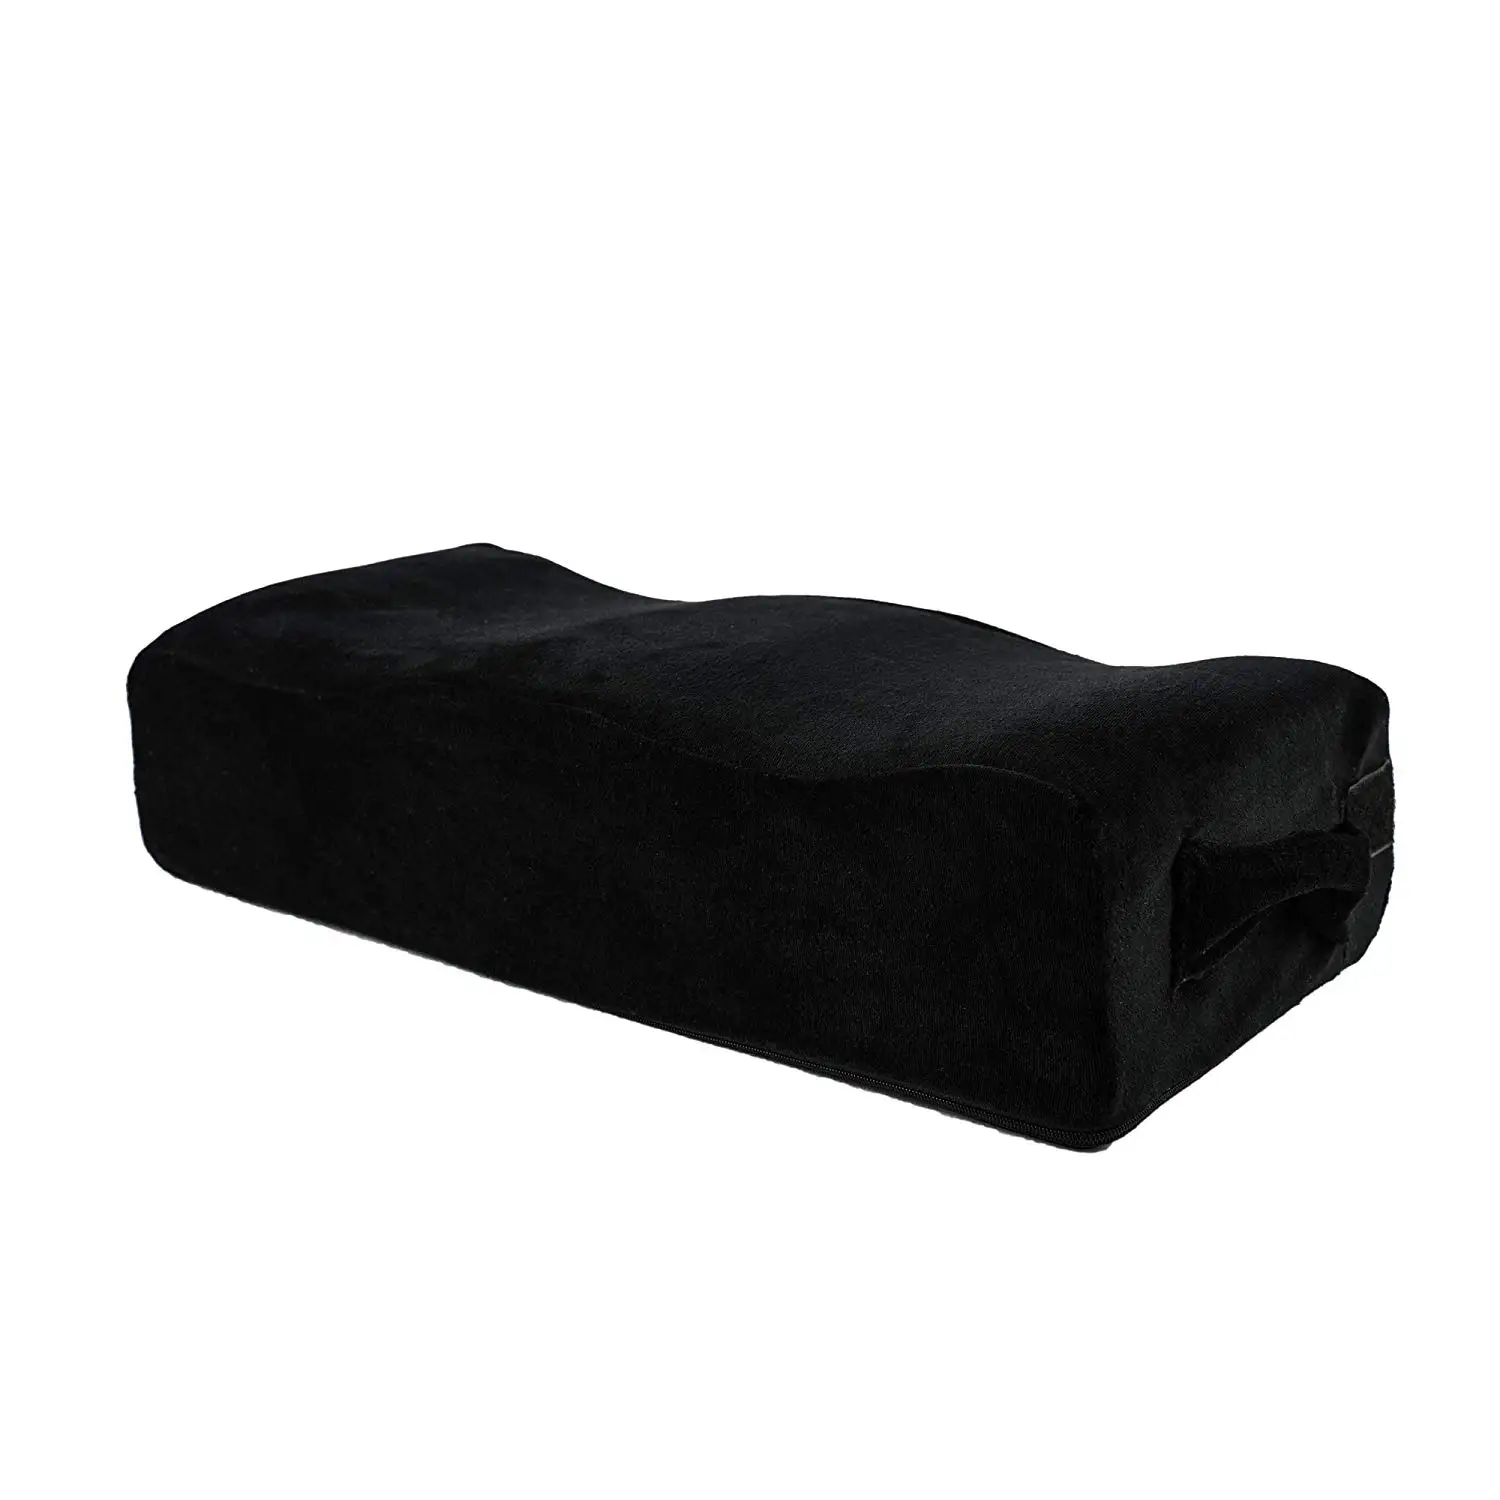 Buy Premium Bbl Booty Pillow For Post Recovery Brazilian Butt Lift